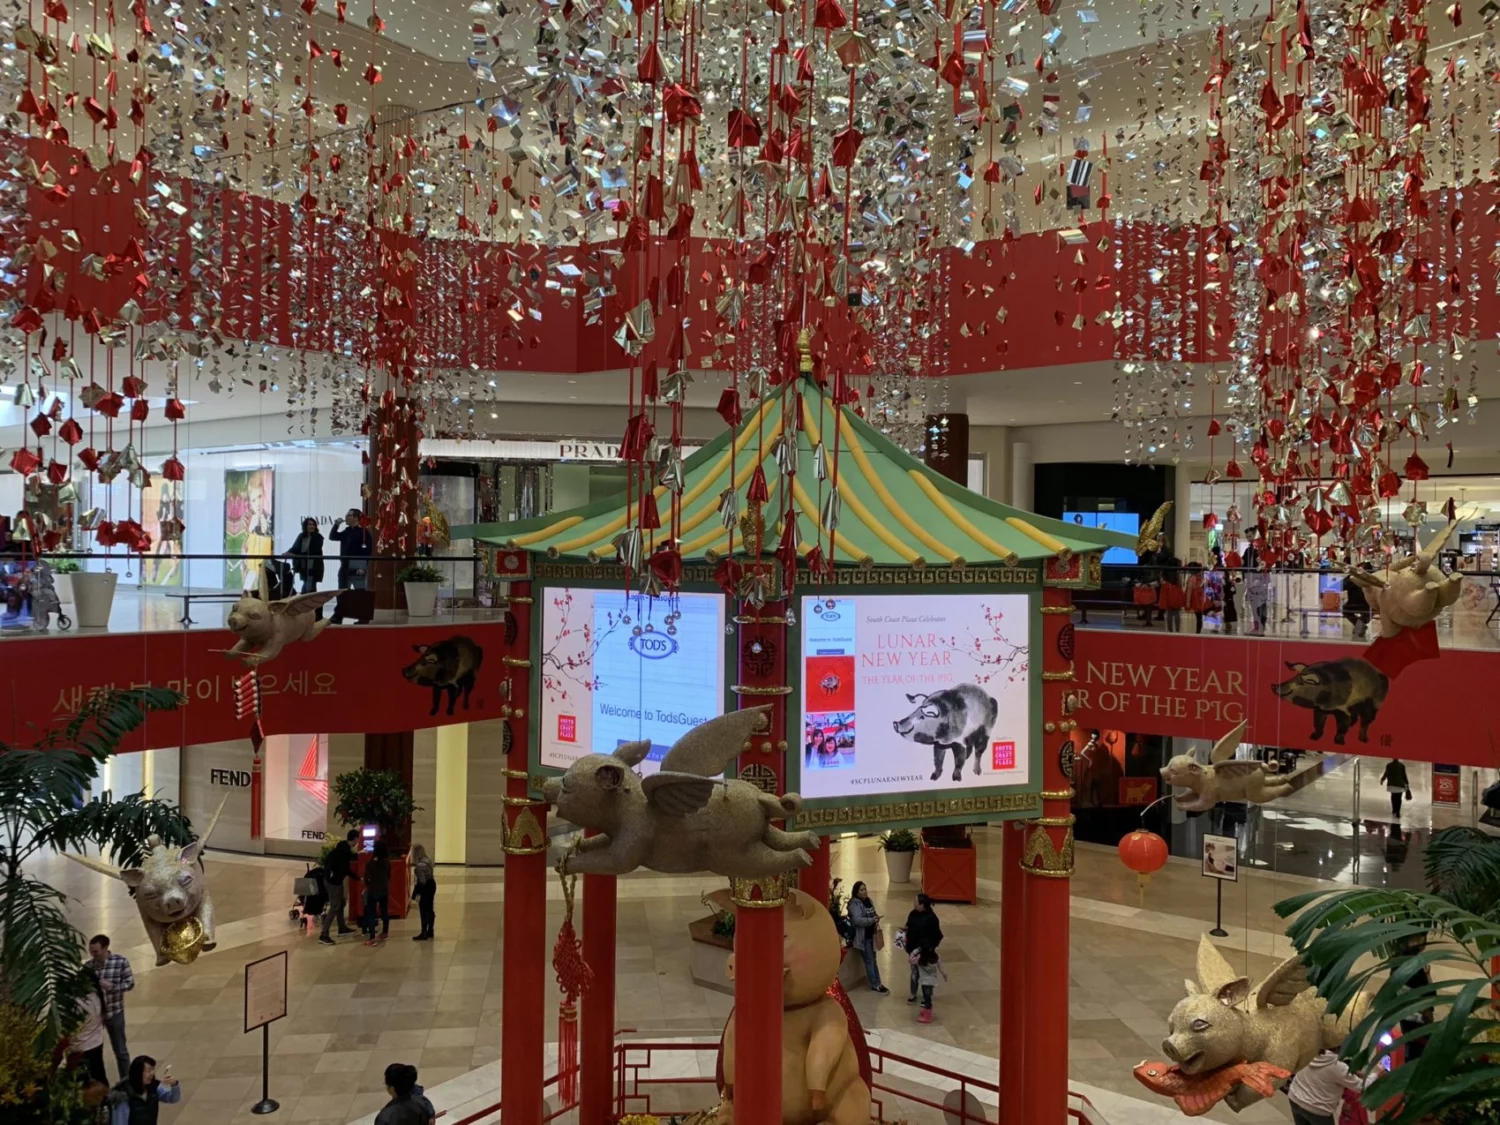 Image of LED display at Lunar New Year Event